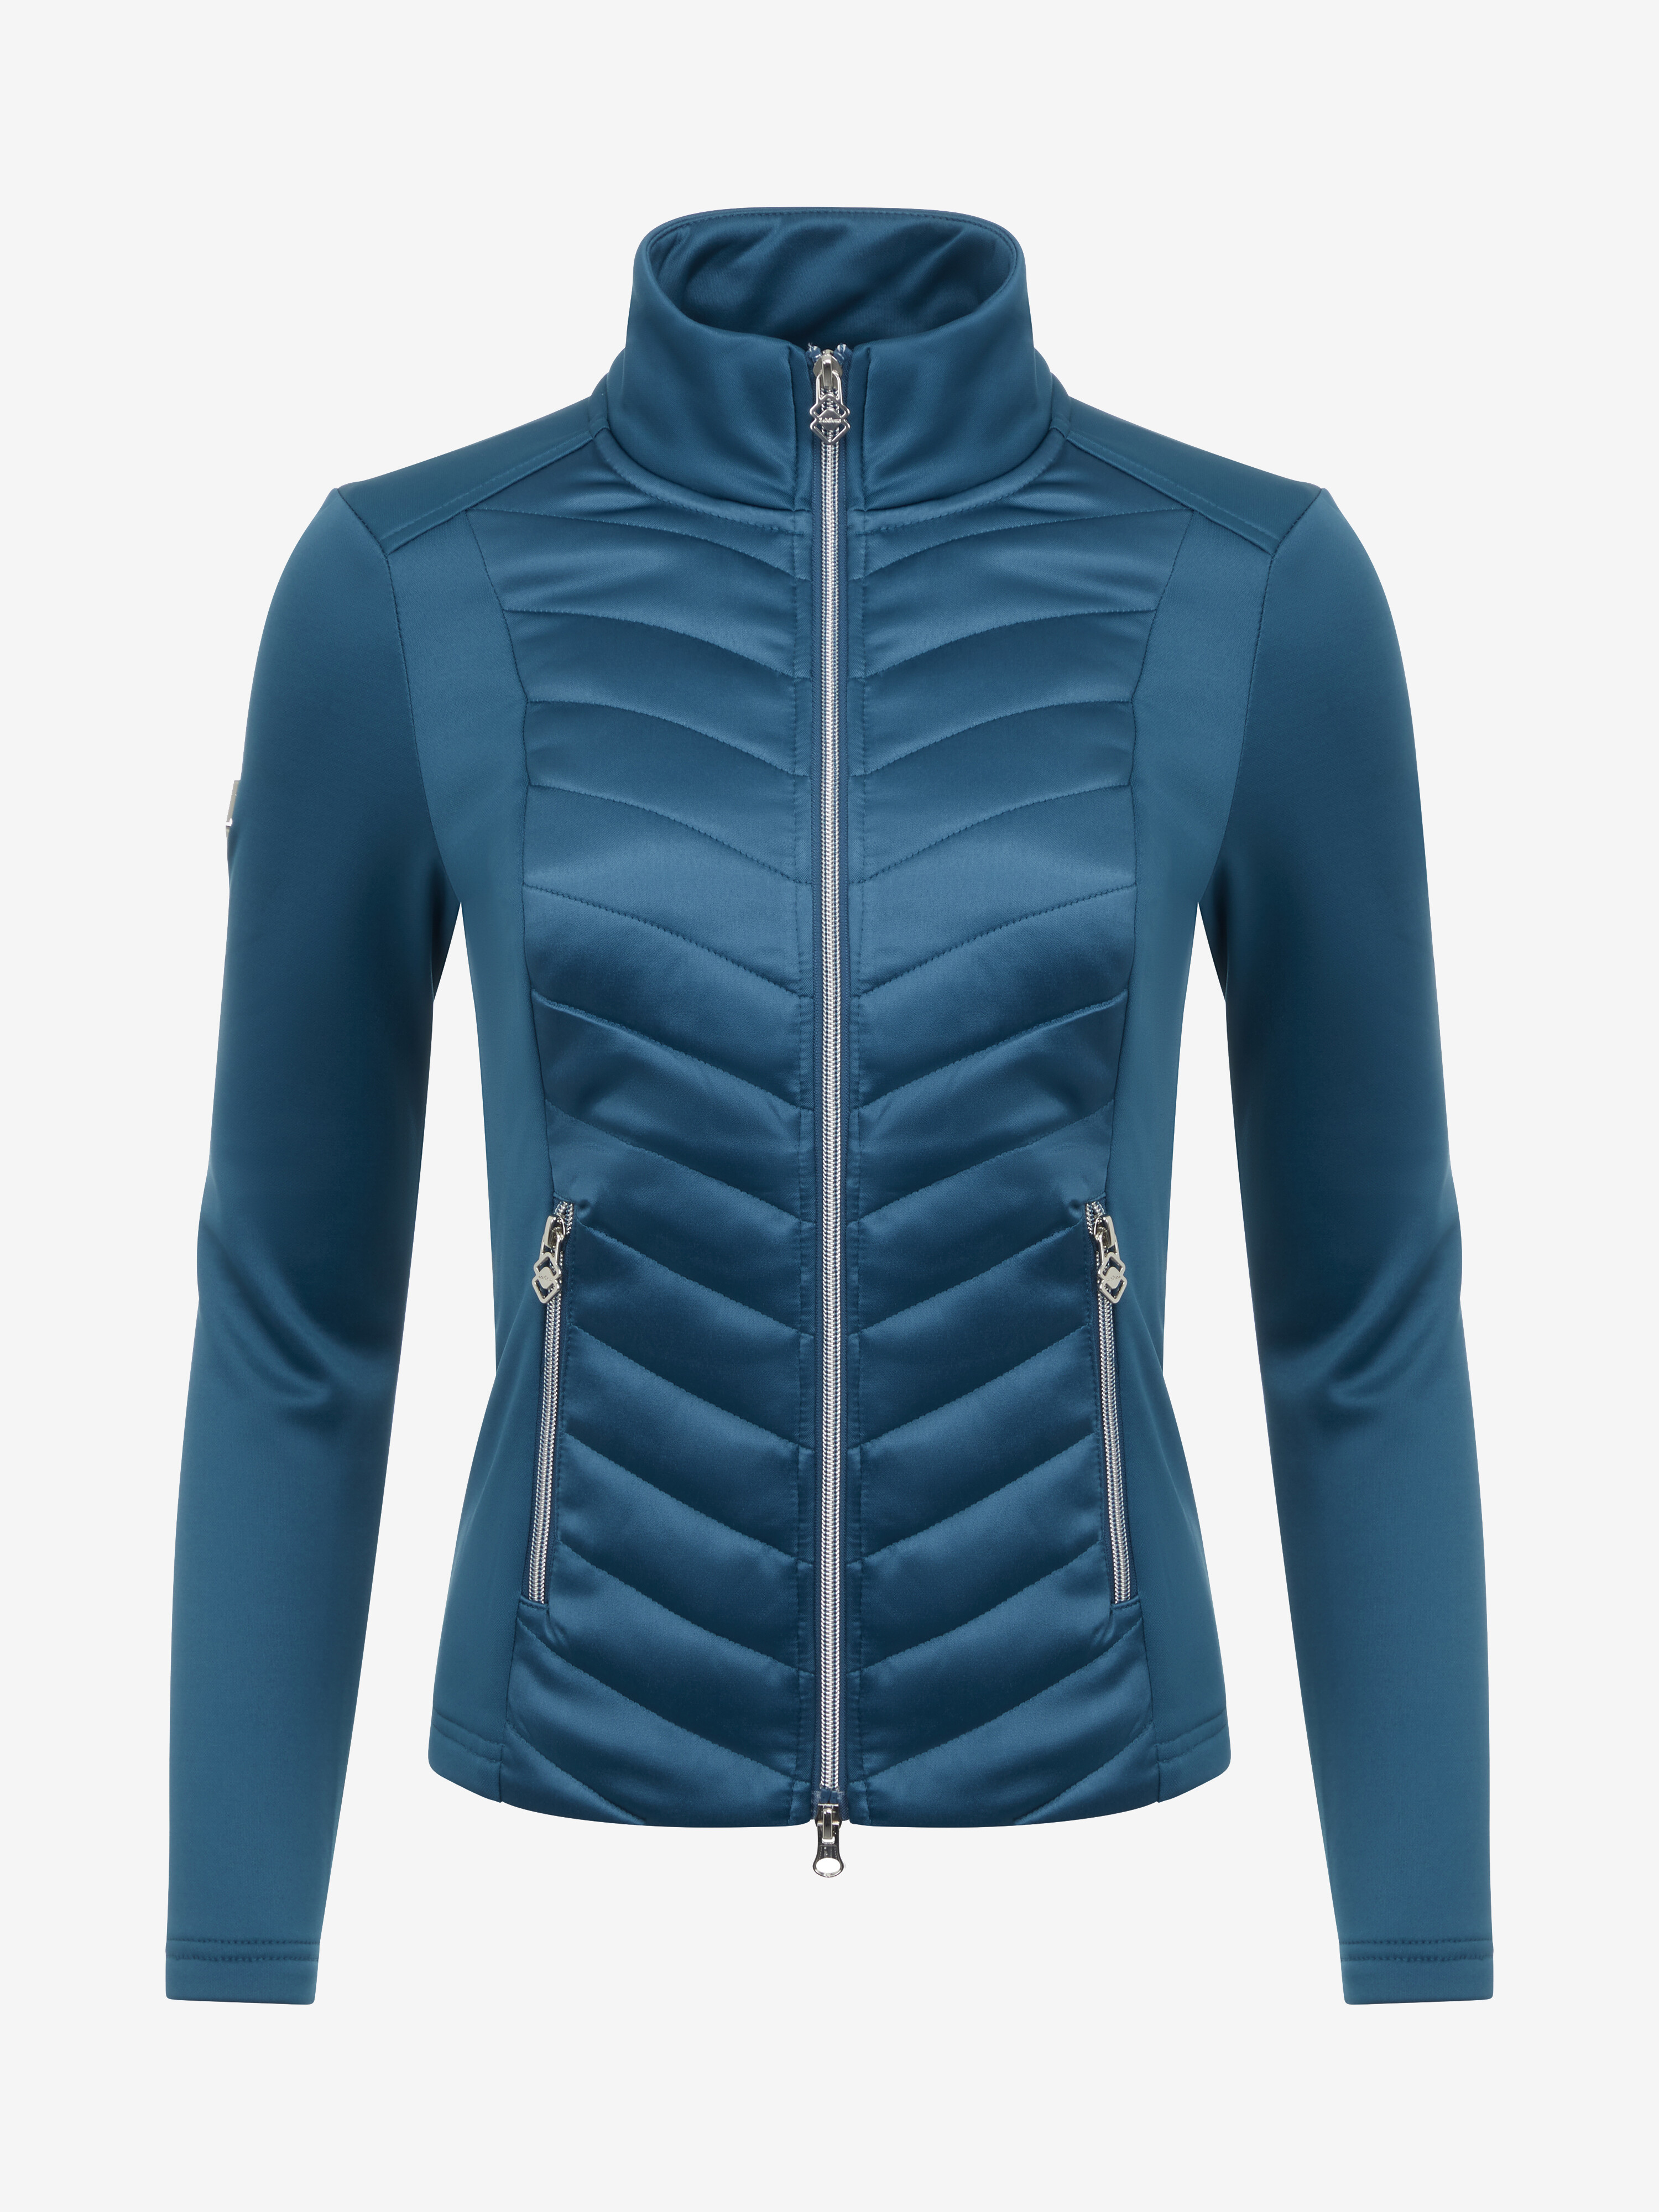  Lands' End Womens Active HR Soft Performance Refined